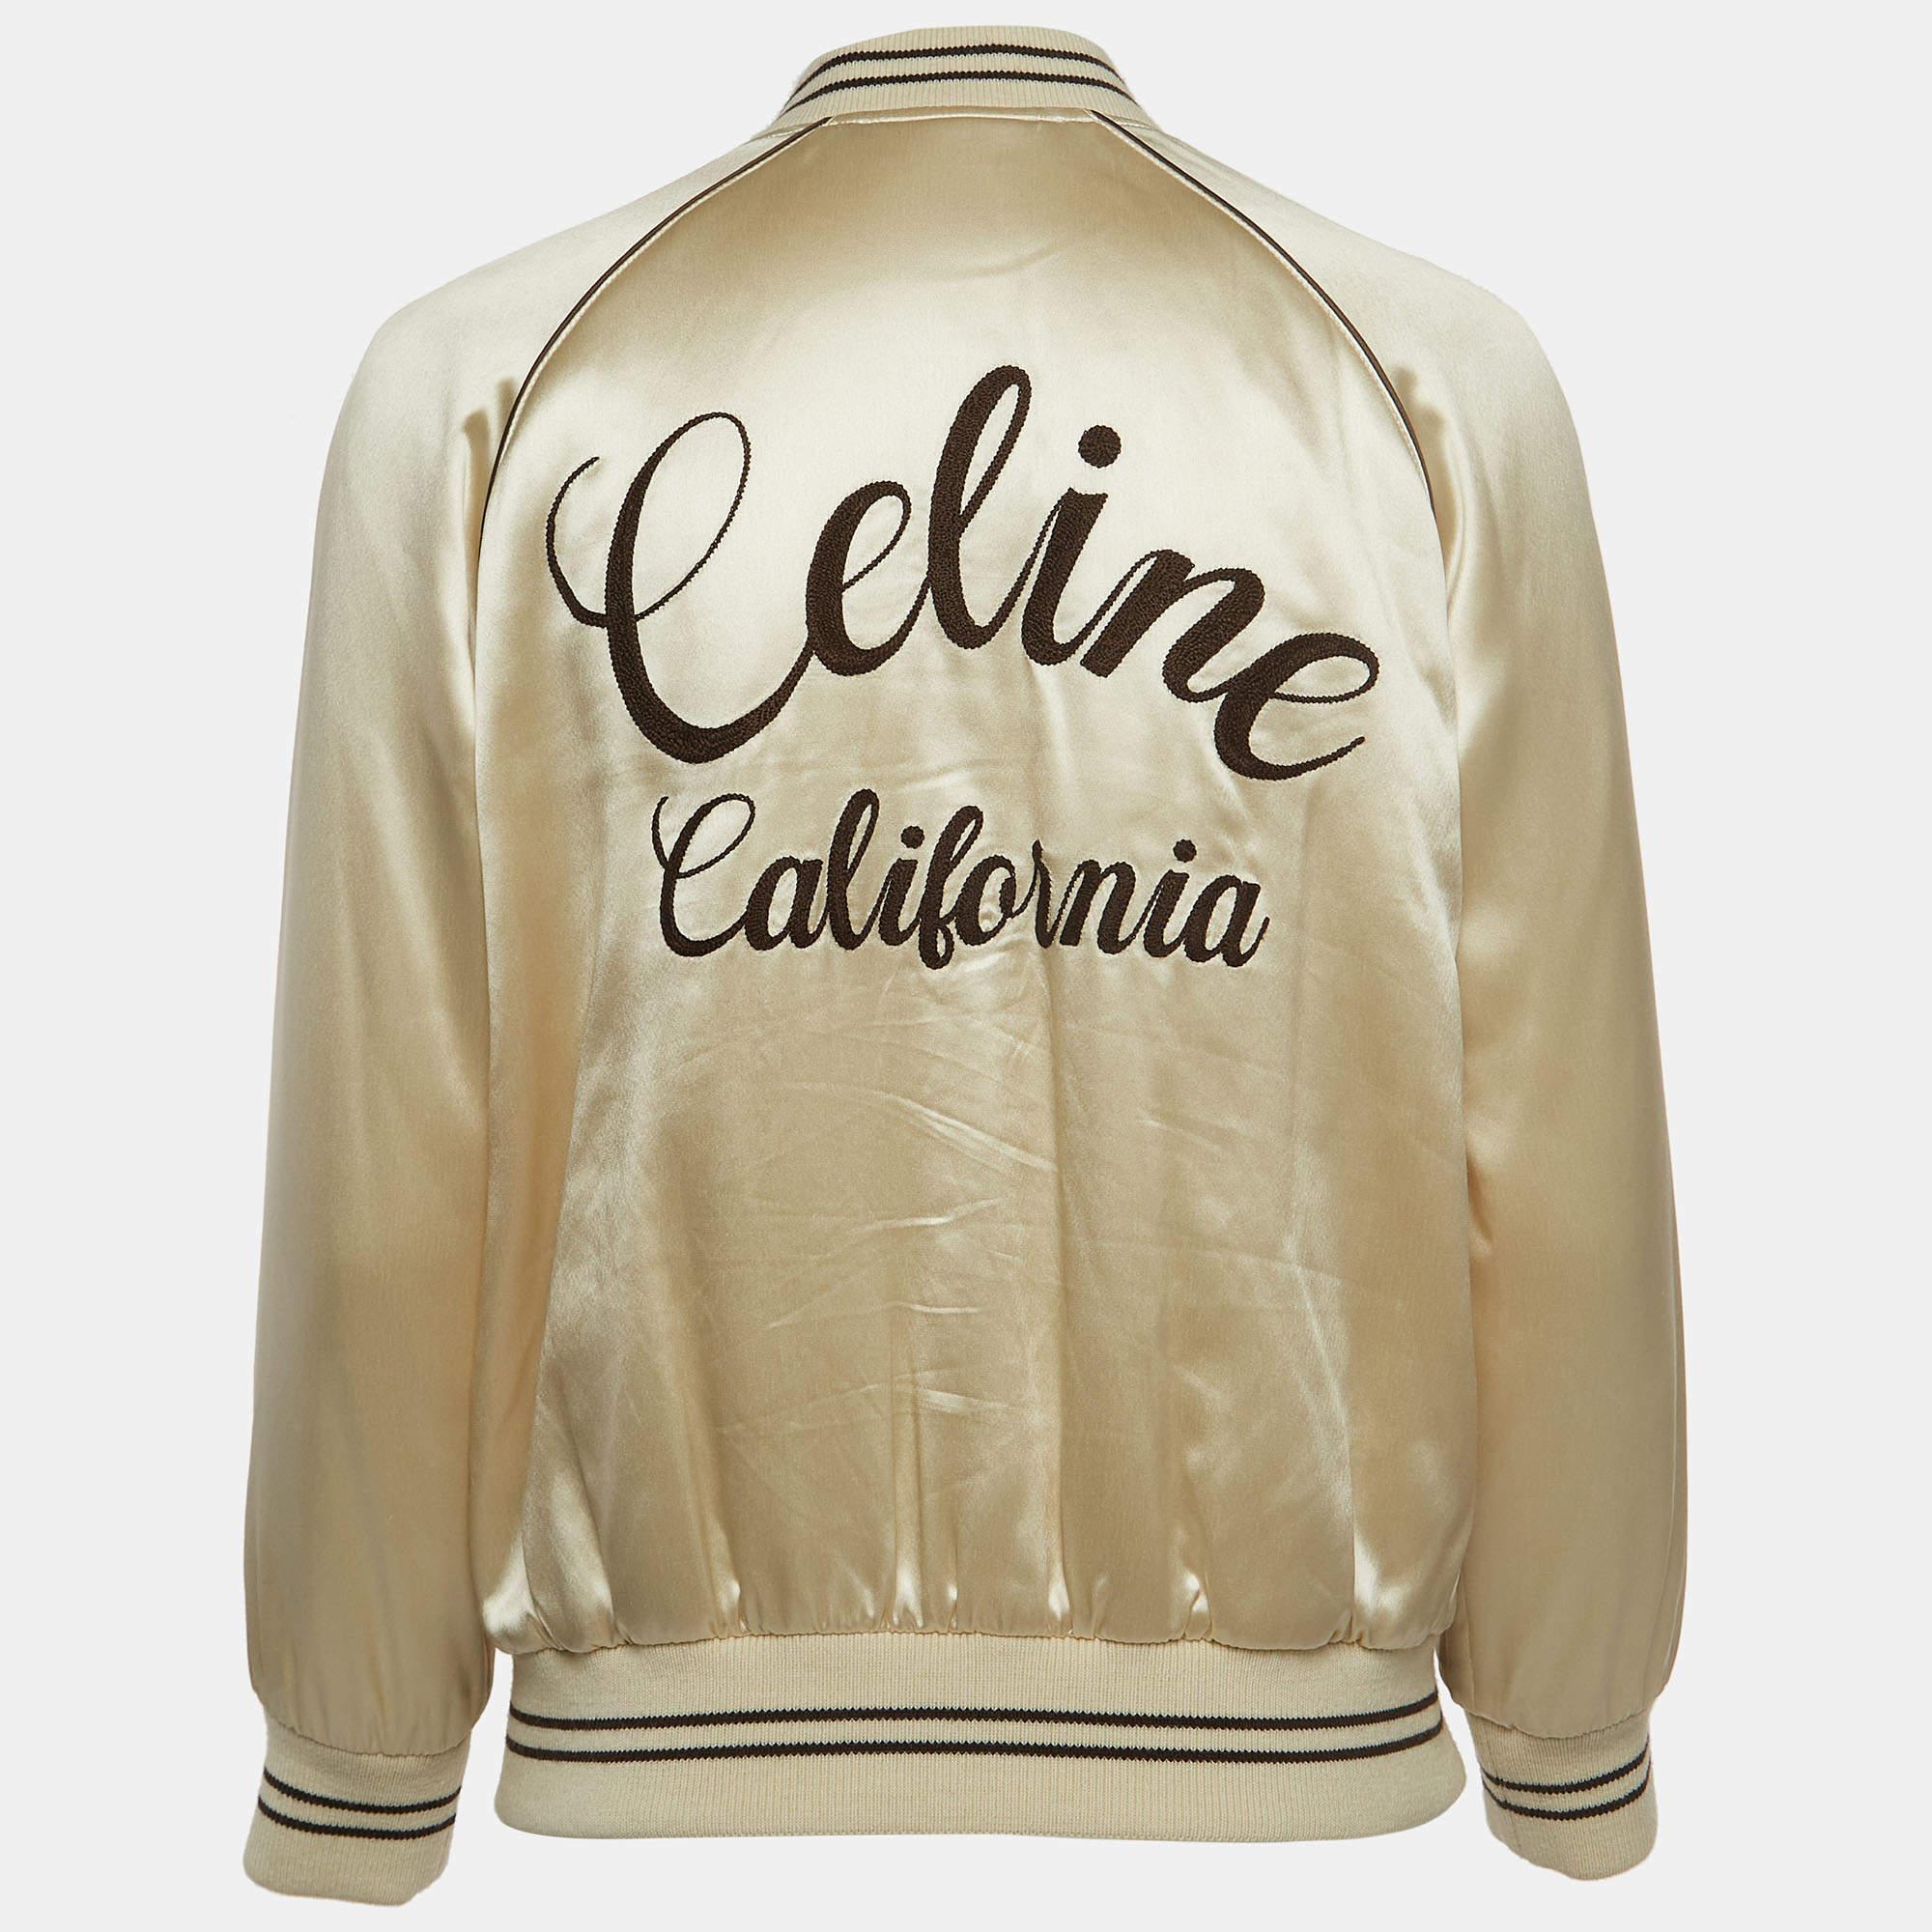 This jacket set is a prize you will want to keep even if you have worn it countless times. It is from Celine and it truly is an example of the brand's attention to quality and timeless creativity.

Includes: celine hanger, Original Dustbag

